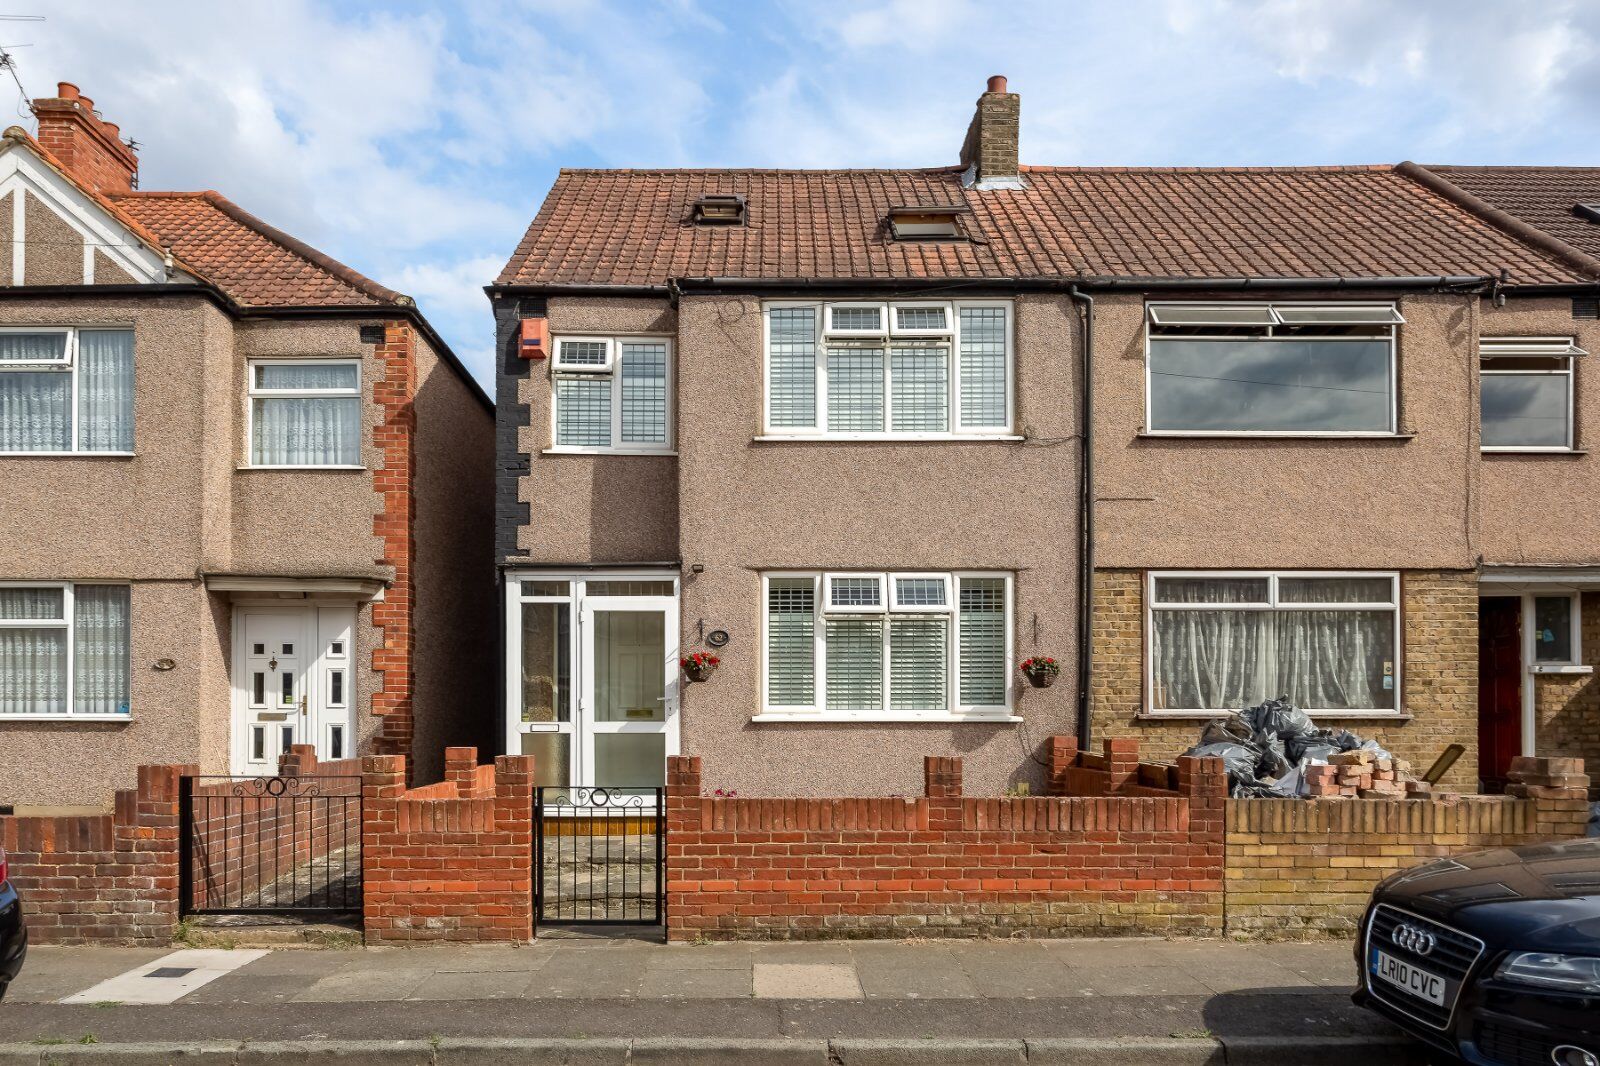 4 bedroom end terraced house for sale Abbotts Road, Mitcham, CR4, main image